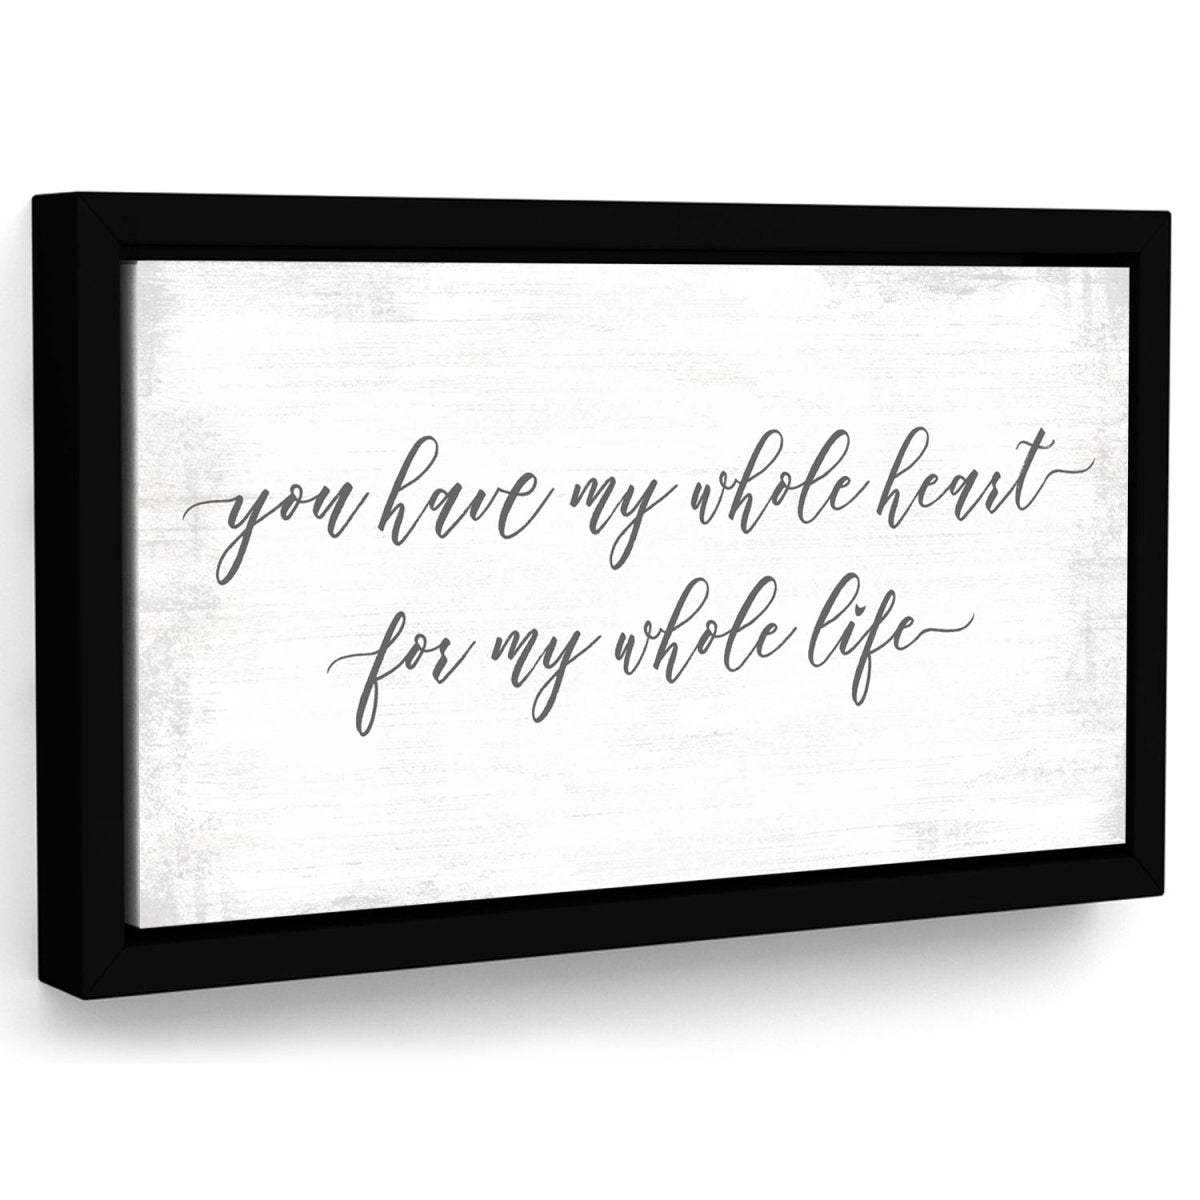 You Have My Whole Heart For My Whole Life Sign - Pretty Perfect Studio